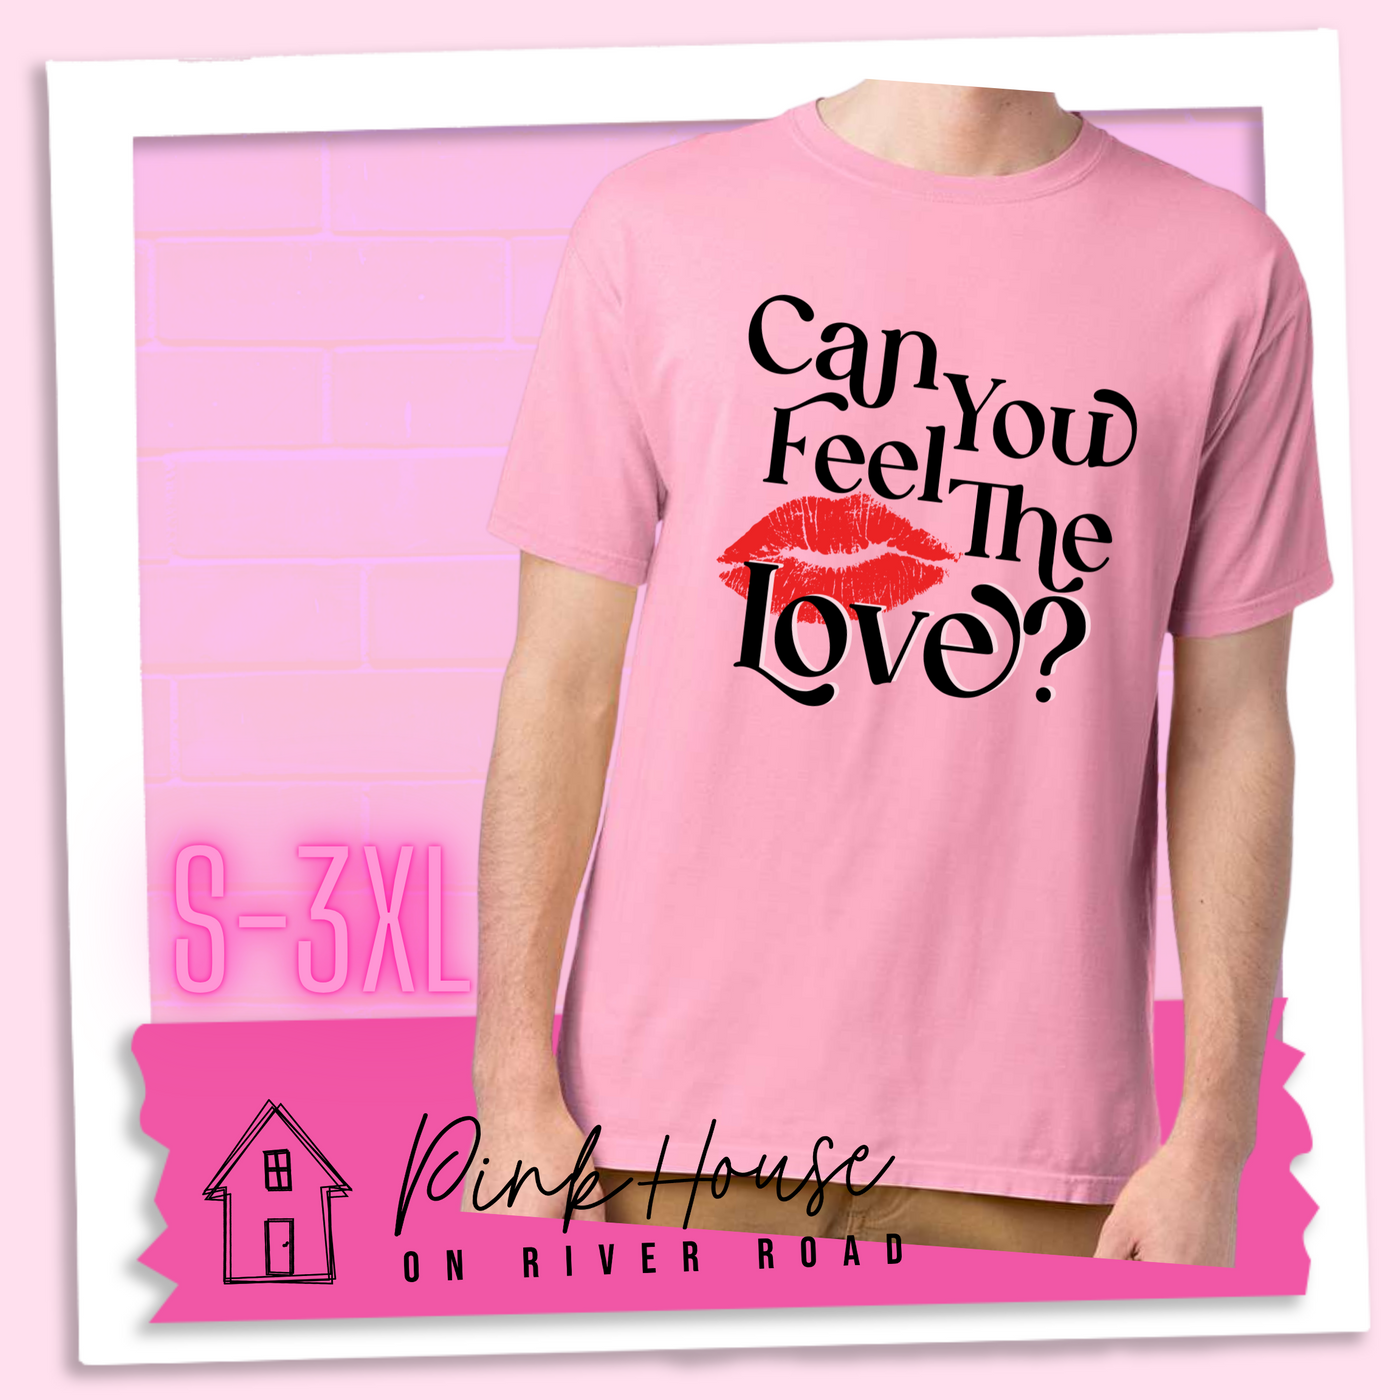 Cotton Candy Tee that says "Can you feel the love?" with a pair of red lips